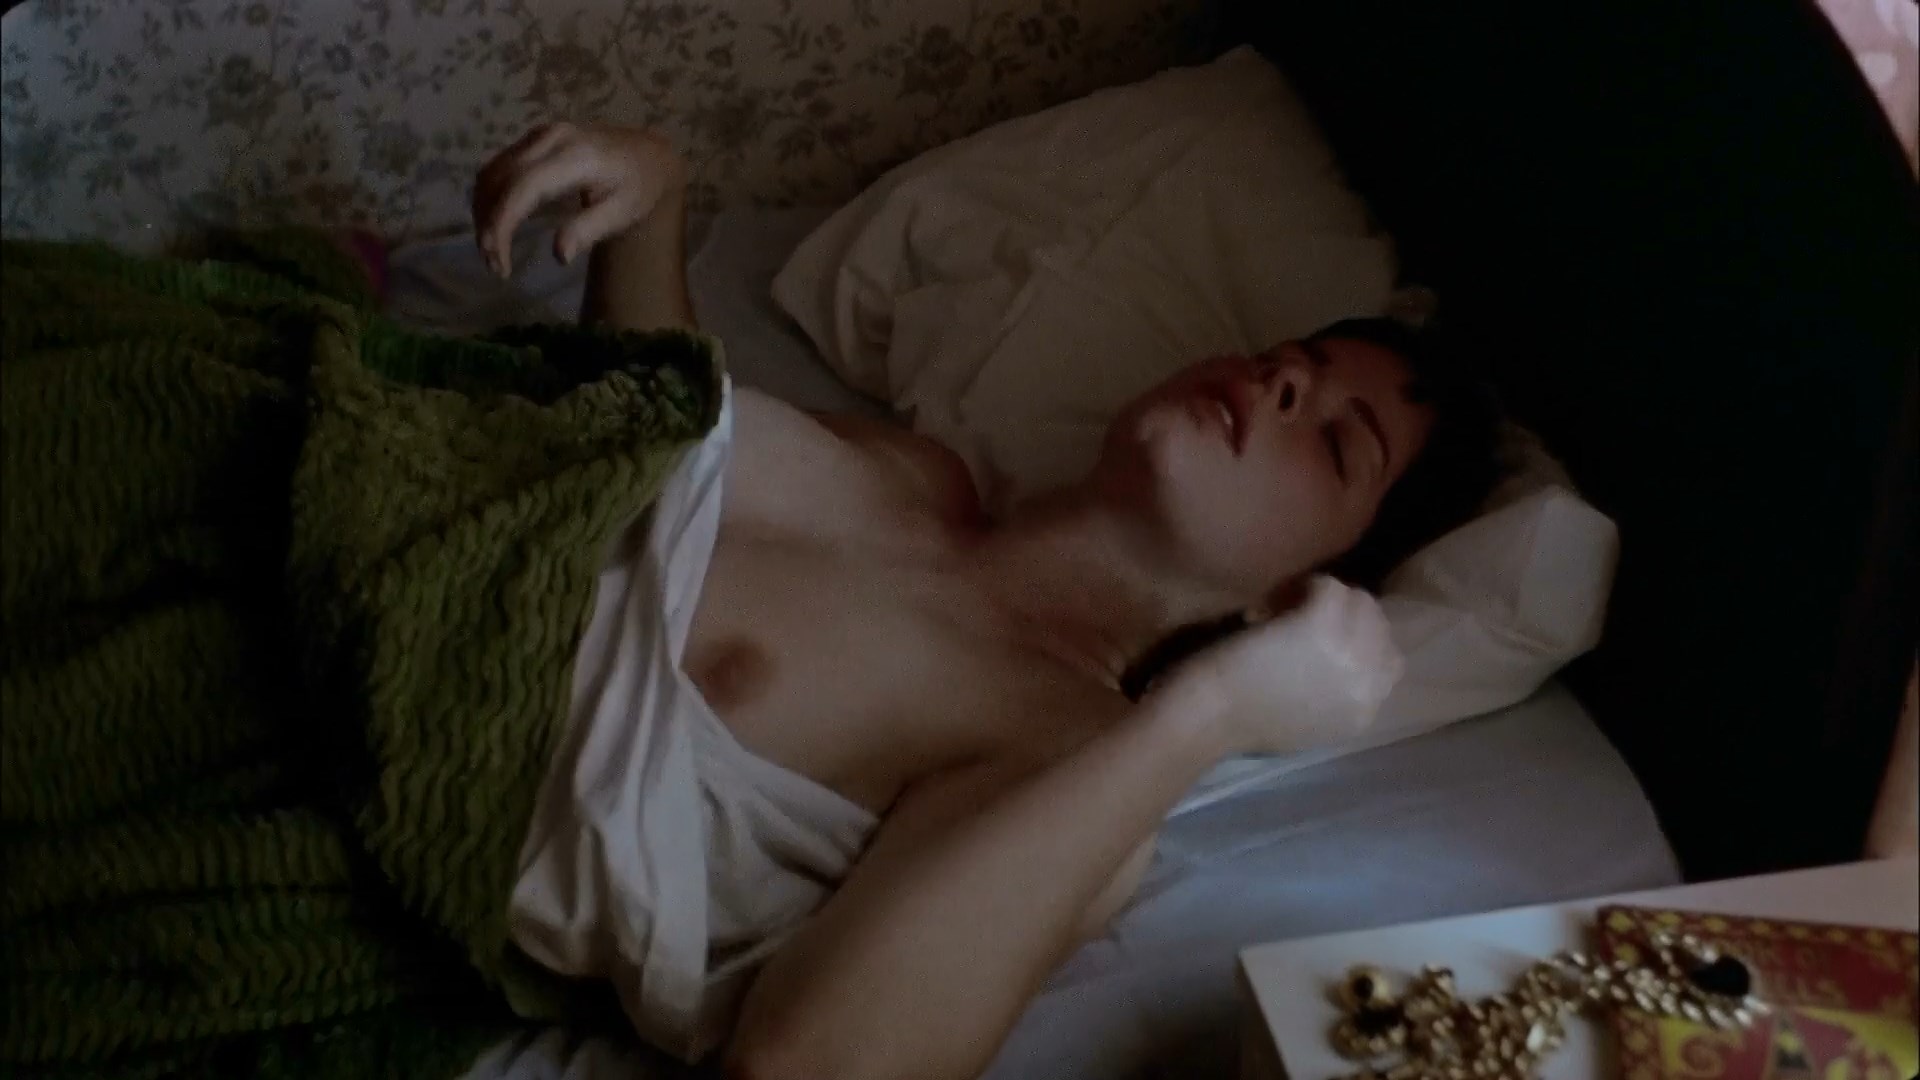 Marcia Gay Harden, Donogh Rees are naked in the movie “Crush” which was rel...